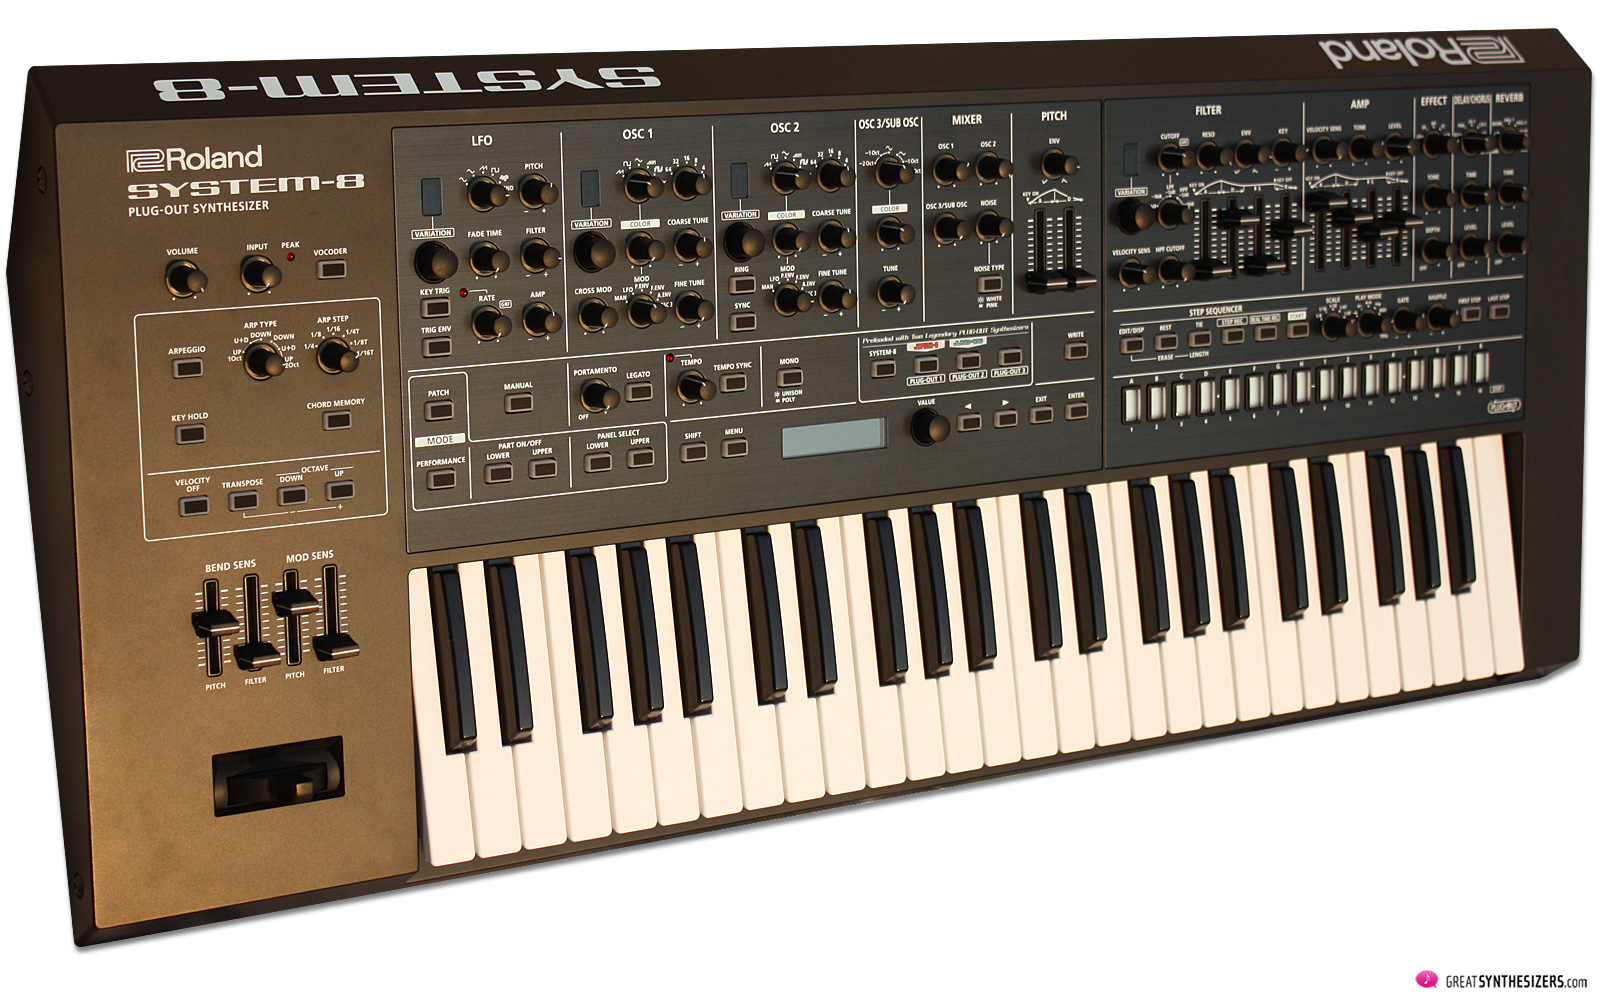 Gevoelig tarief toernooi Roland System-8 - historic turning point? - GreatSynthesizers